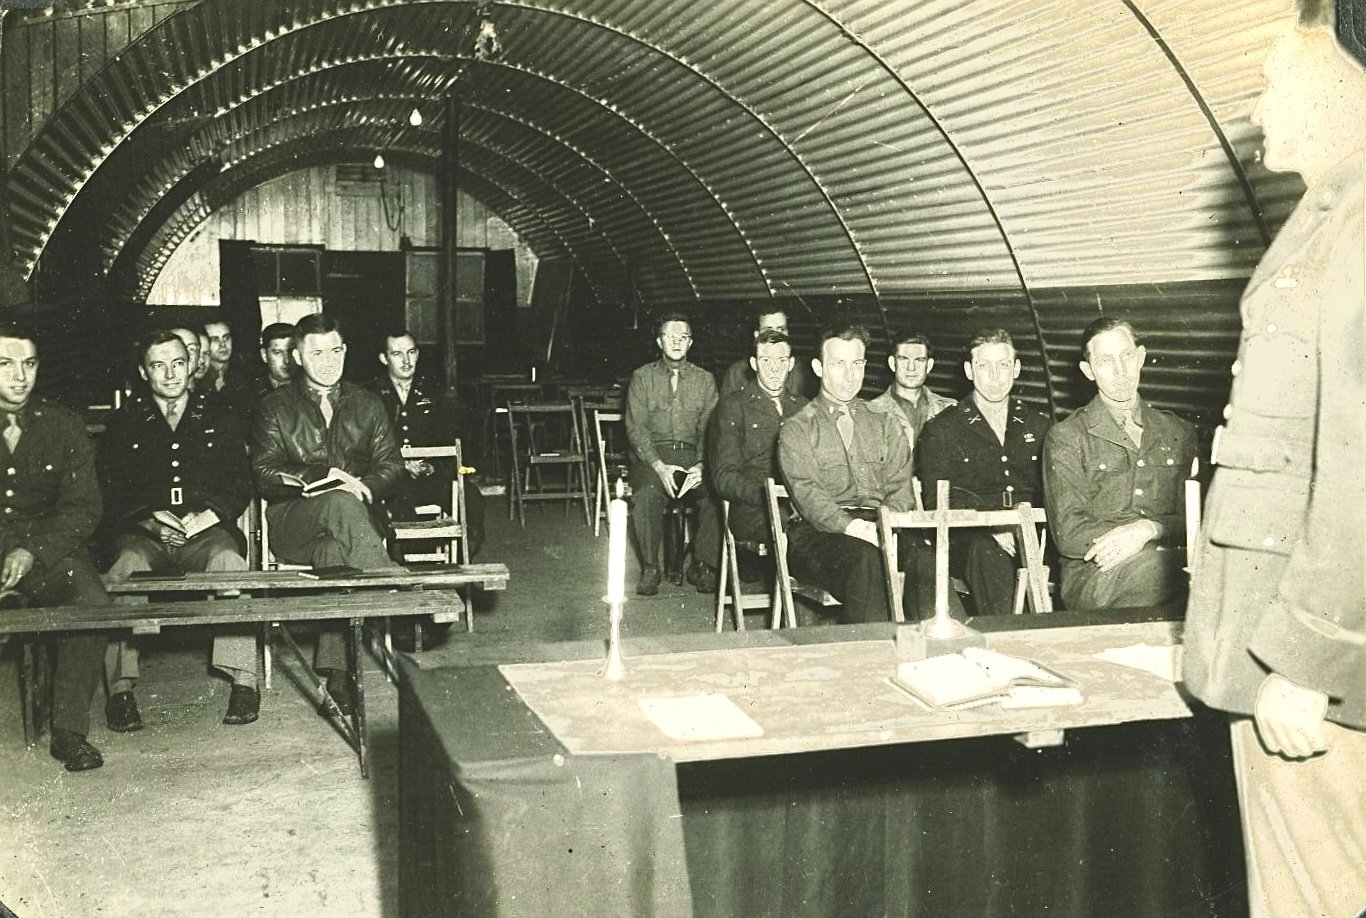 Chaplain Reid delivering his homily in quonset hut congregation